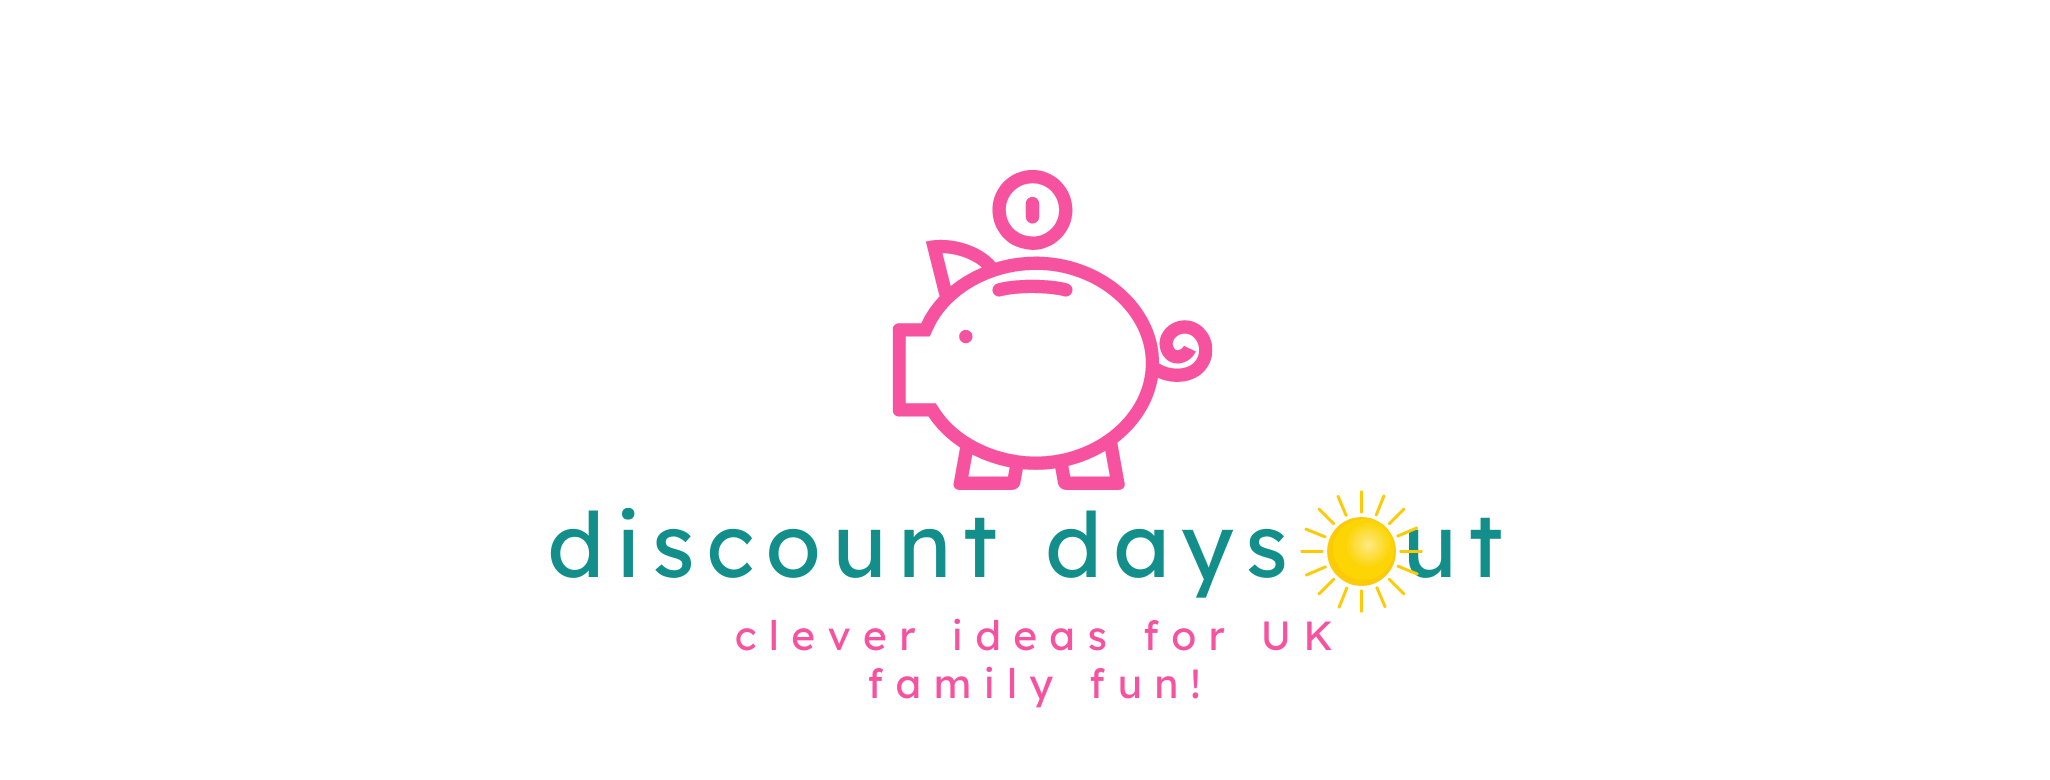 discountdaysout.co.uk